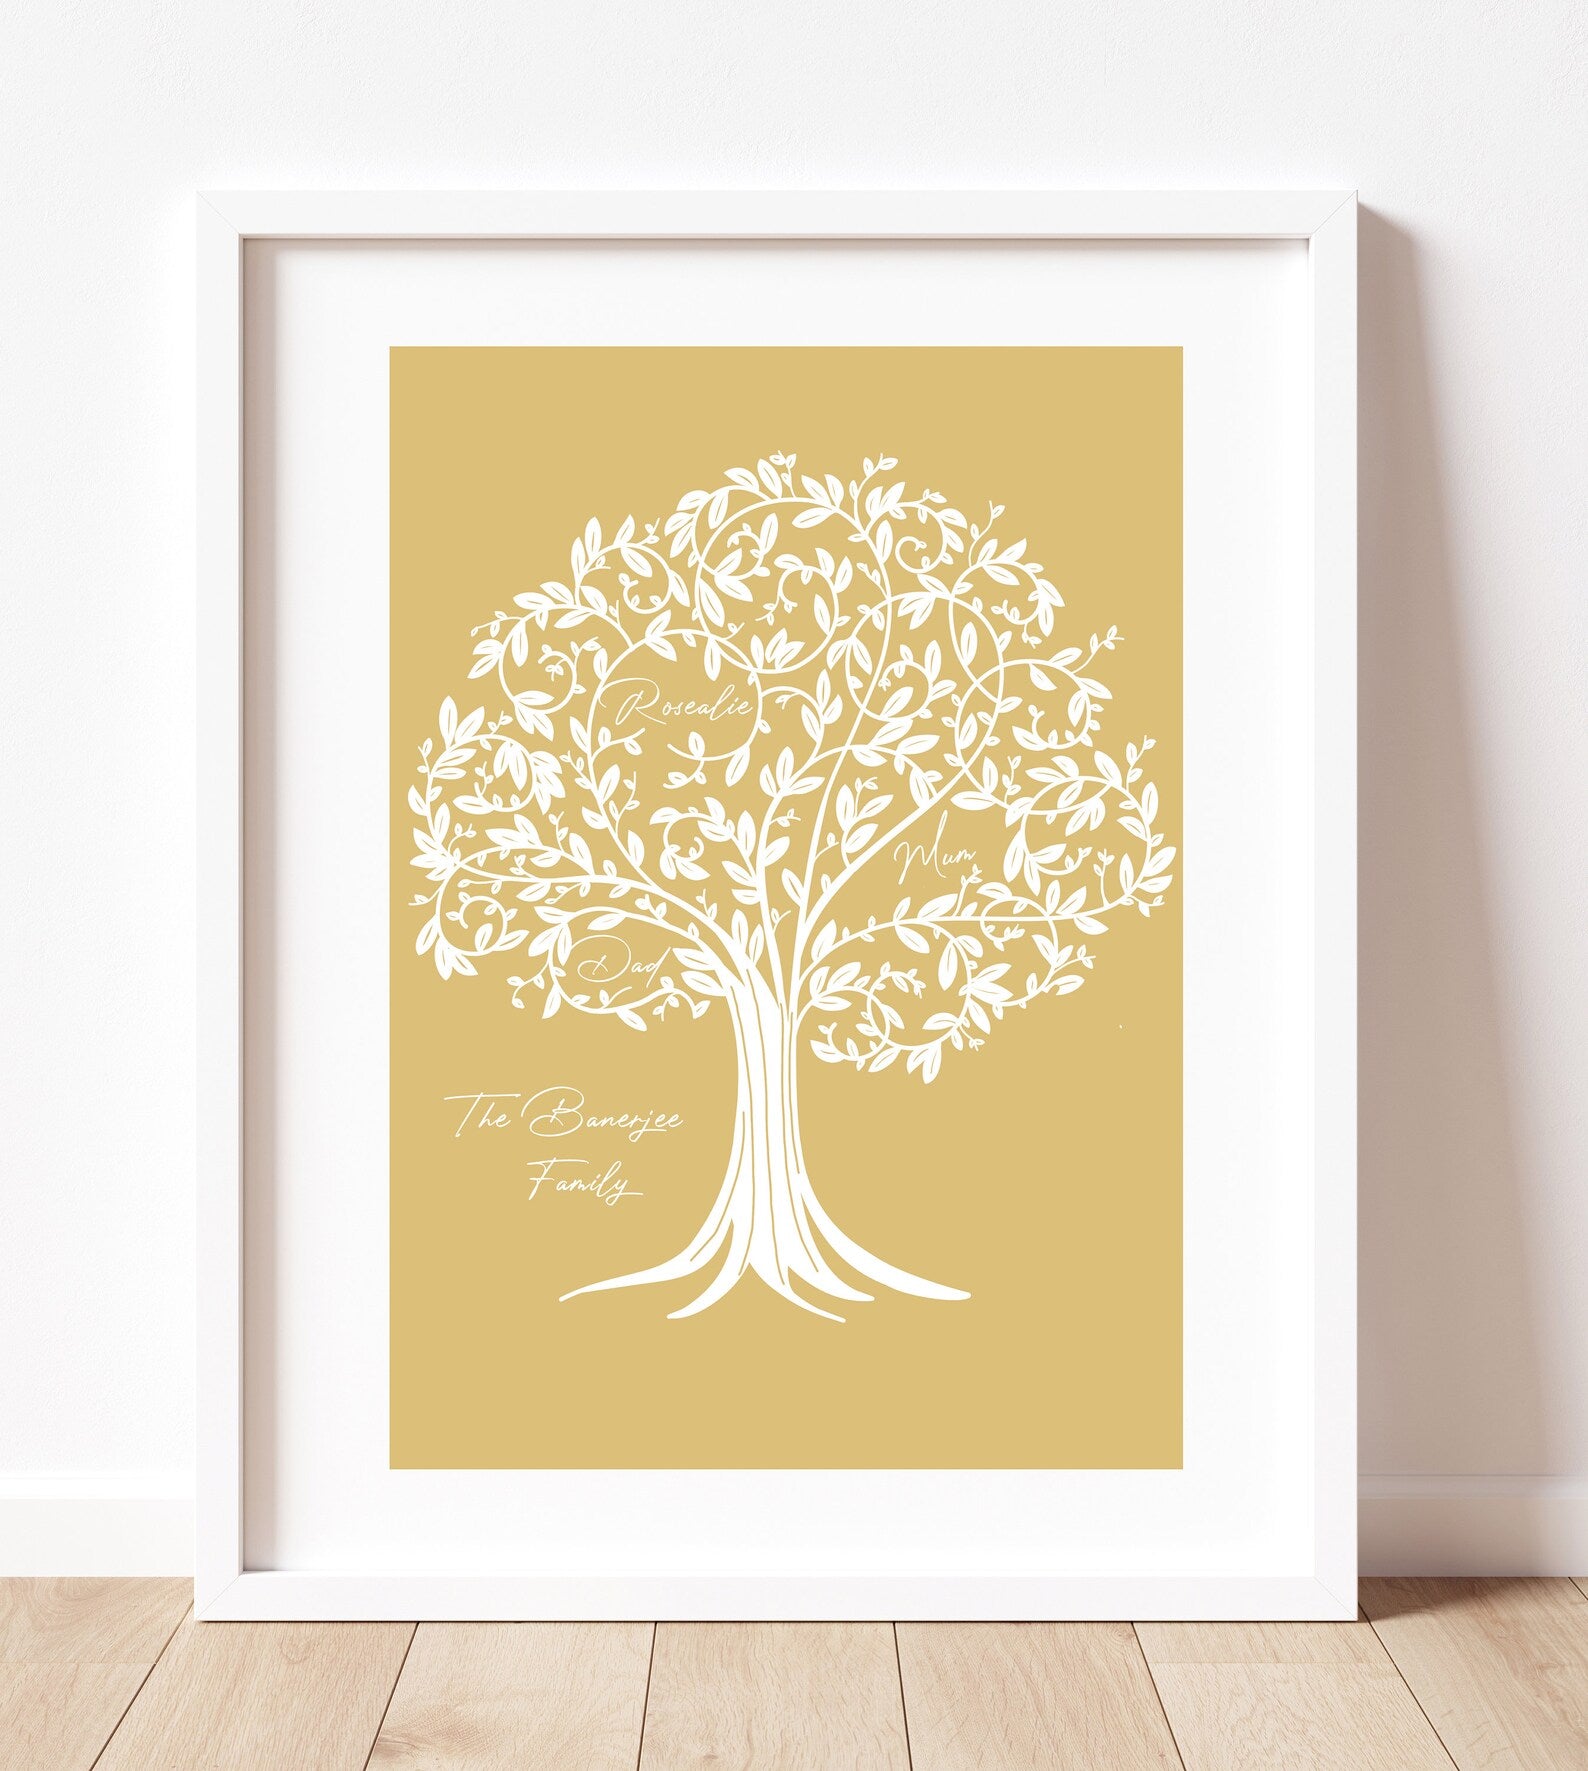 Family Tree Print/ Gift for mum / Mother's Day print /Mothers Day gift / Mum's birthday /Mother's Day / Home print / Mum print/ Family print